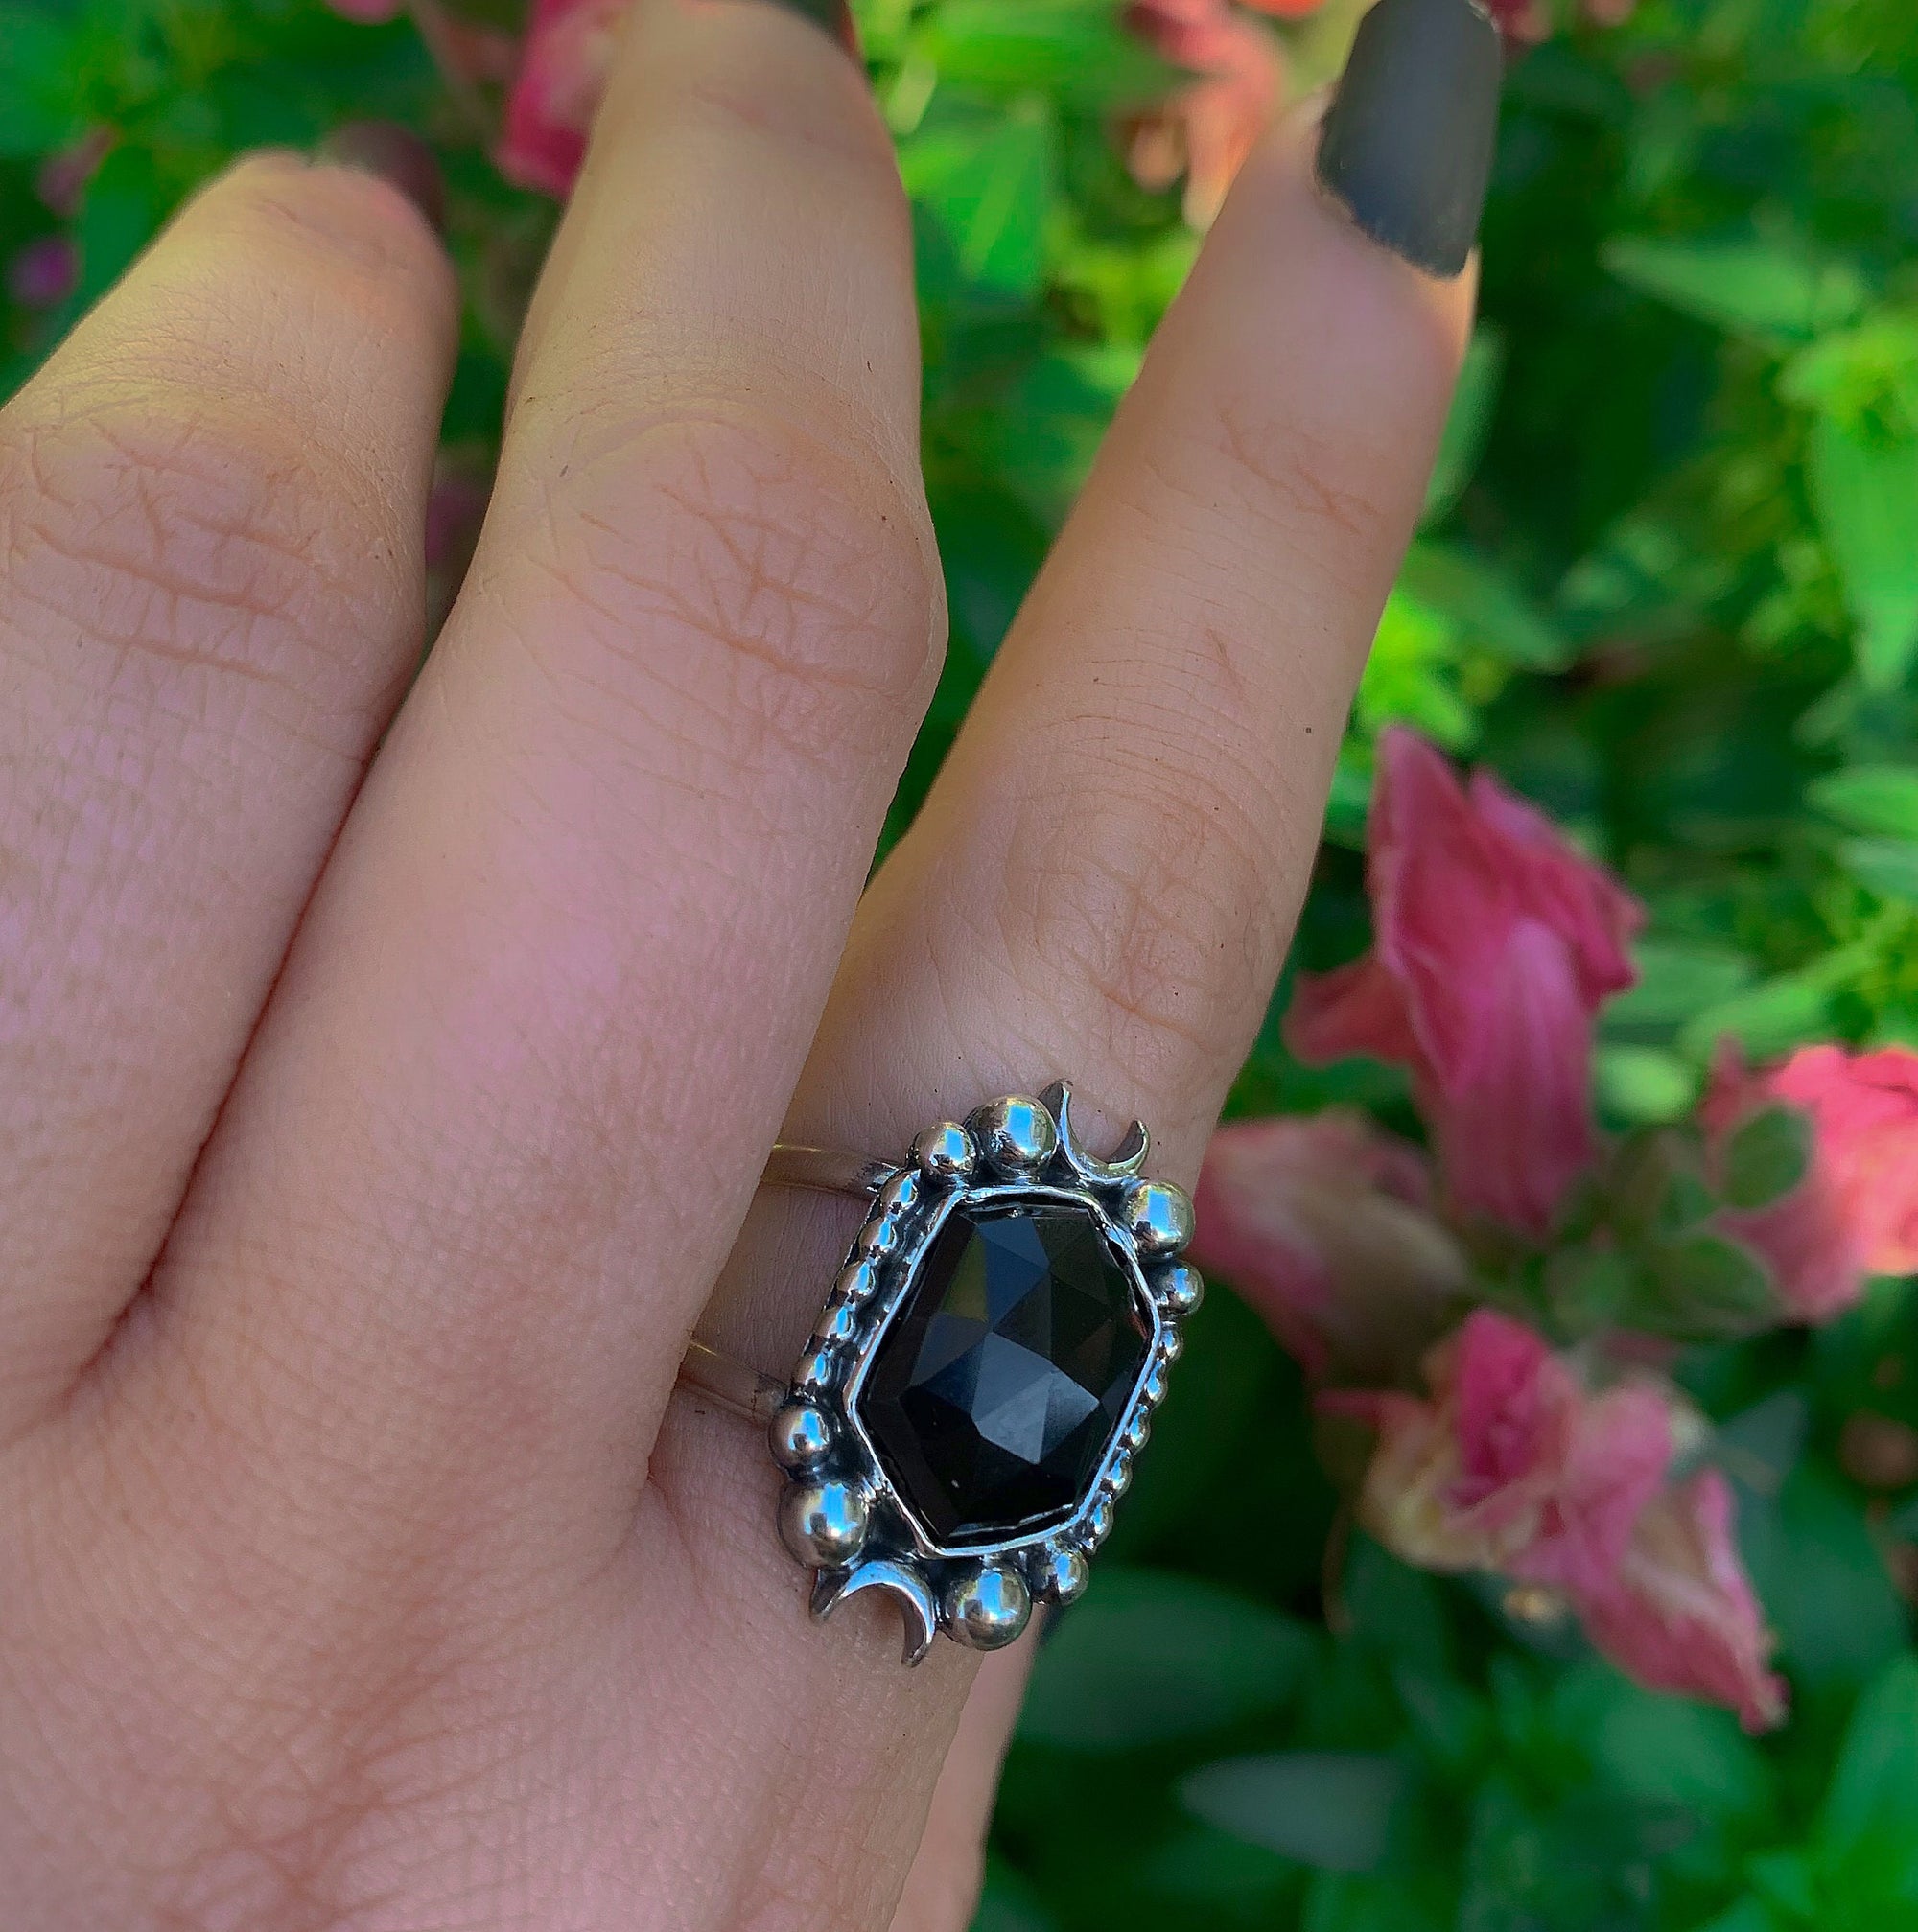 Rose Cut Black Onyx Ring - Size 8 1/2 - Sterling Silver - Hexagonal Onyx Ring - Faceted Onyx Moon Ring, Black Gemstone Crescent Moon Jewelry